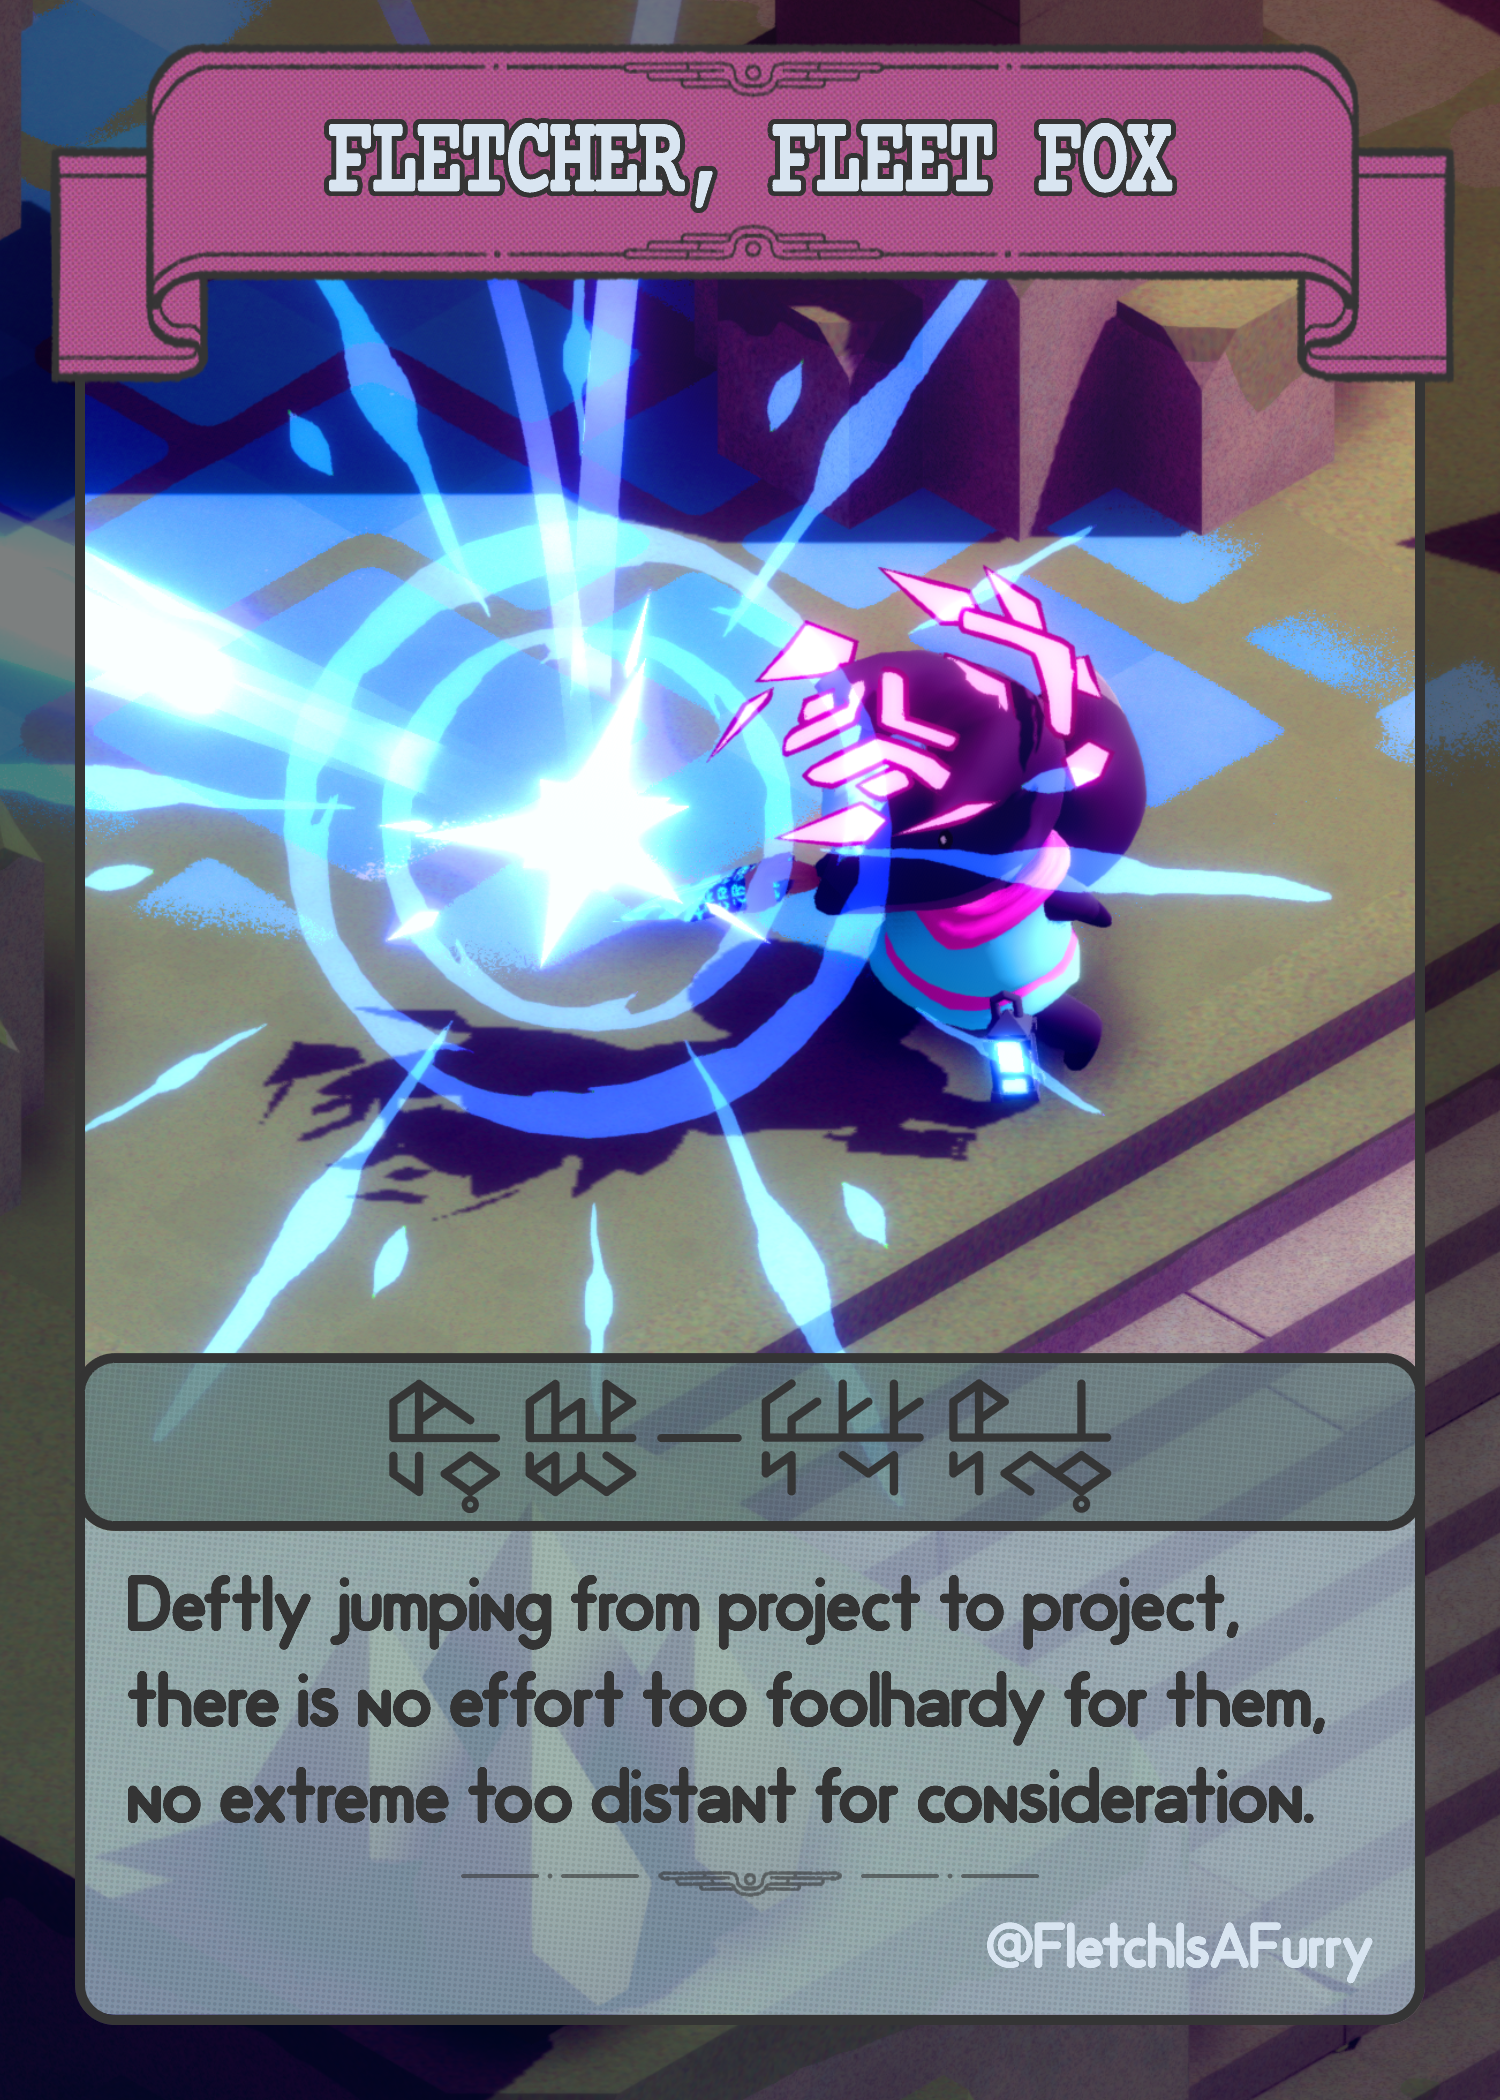 A TUNIC themed trading card for "Fletcher, Fleet Fox," which pictures their character dashing with text reading: "Deftly jumping from project to project, there is no effort too foolhardy for them, no extreme too distant for consideration.".